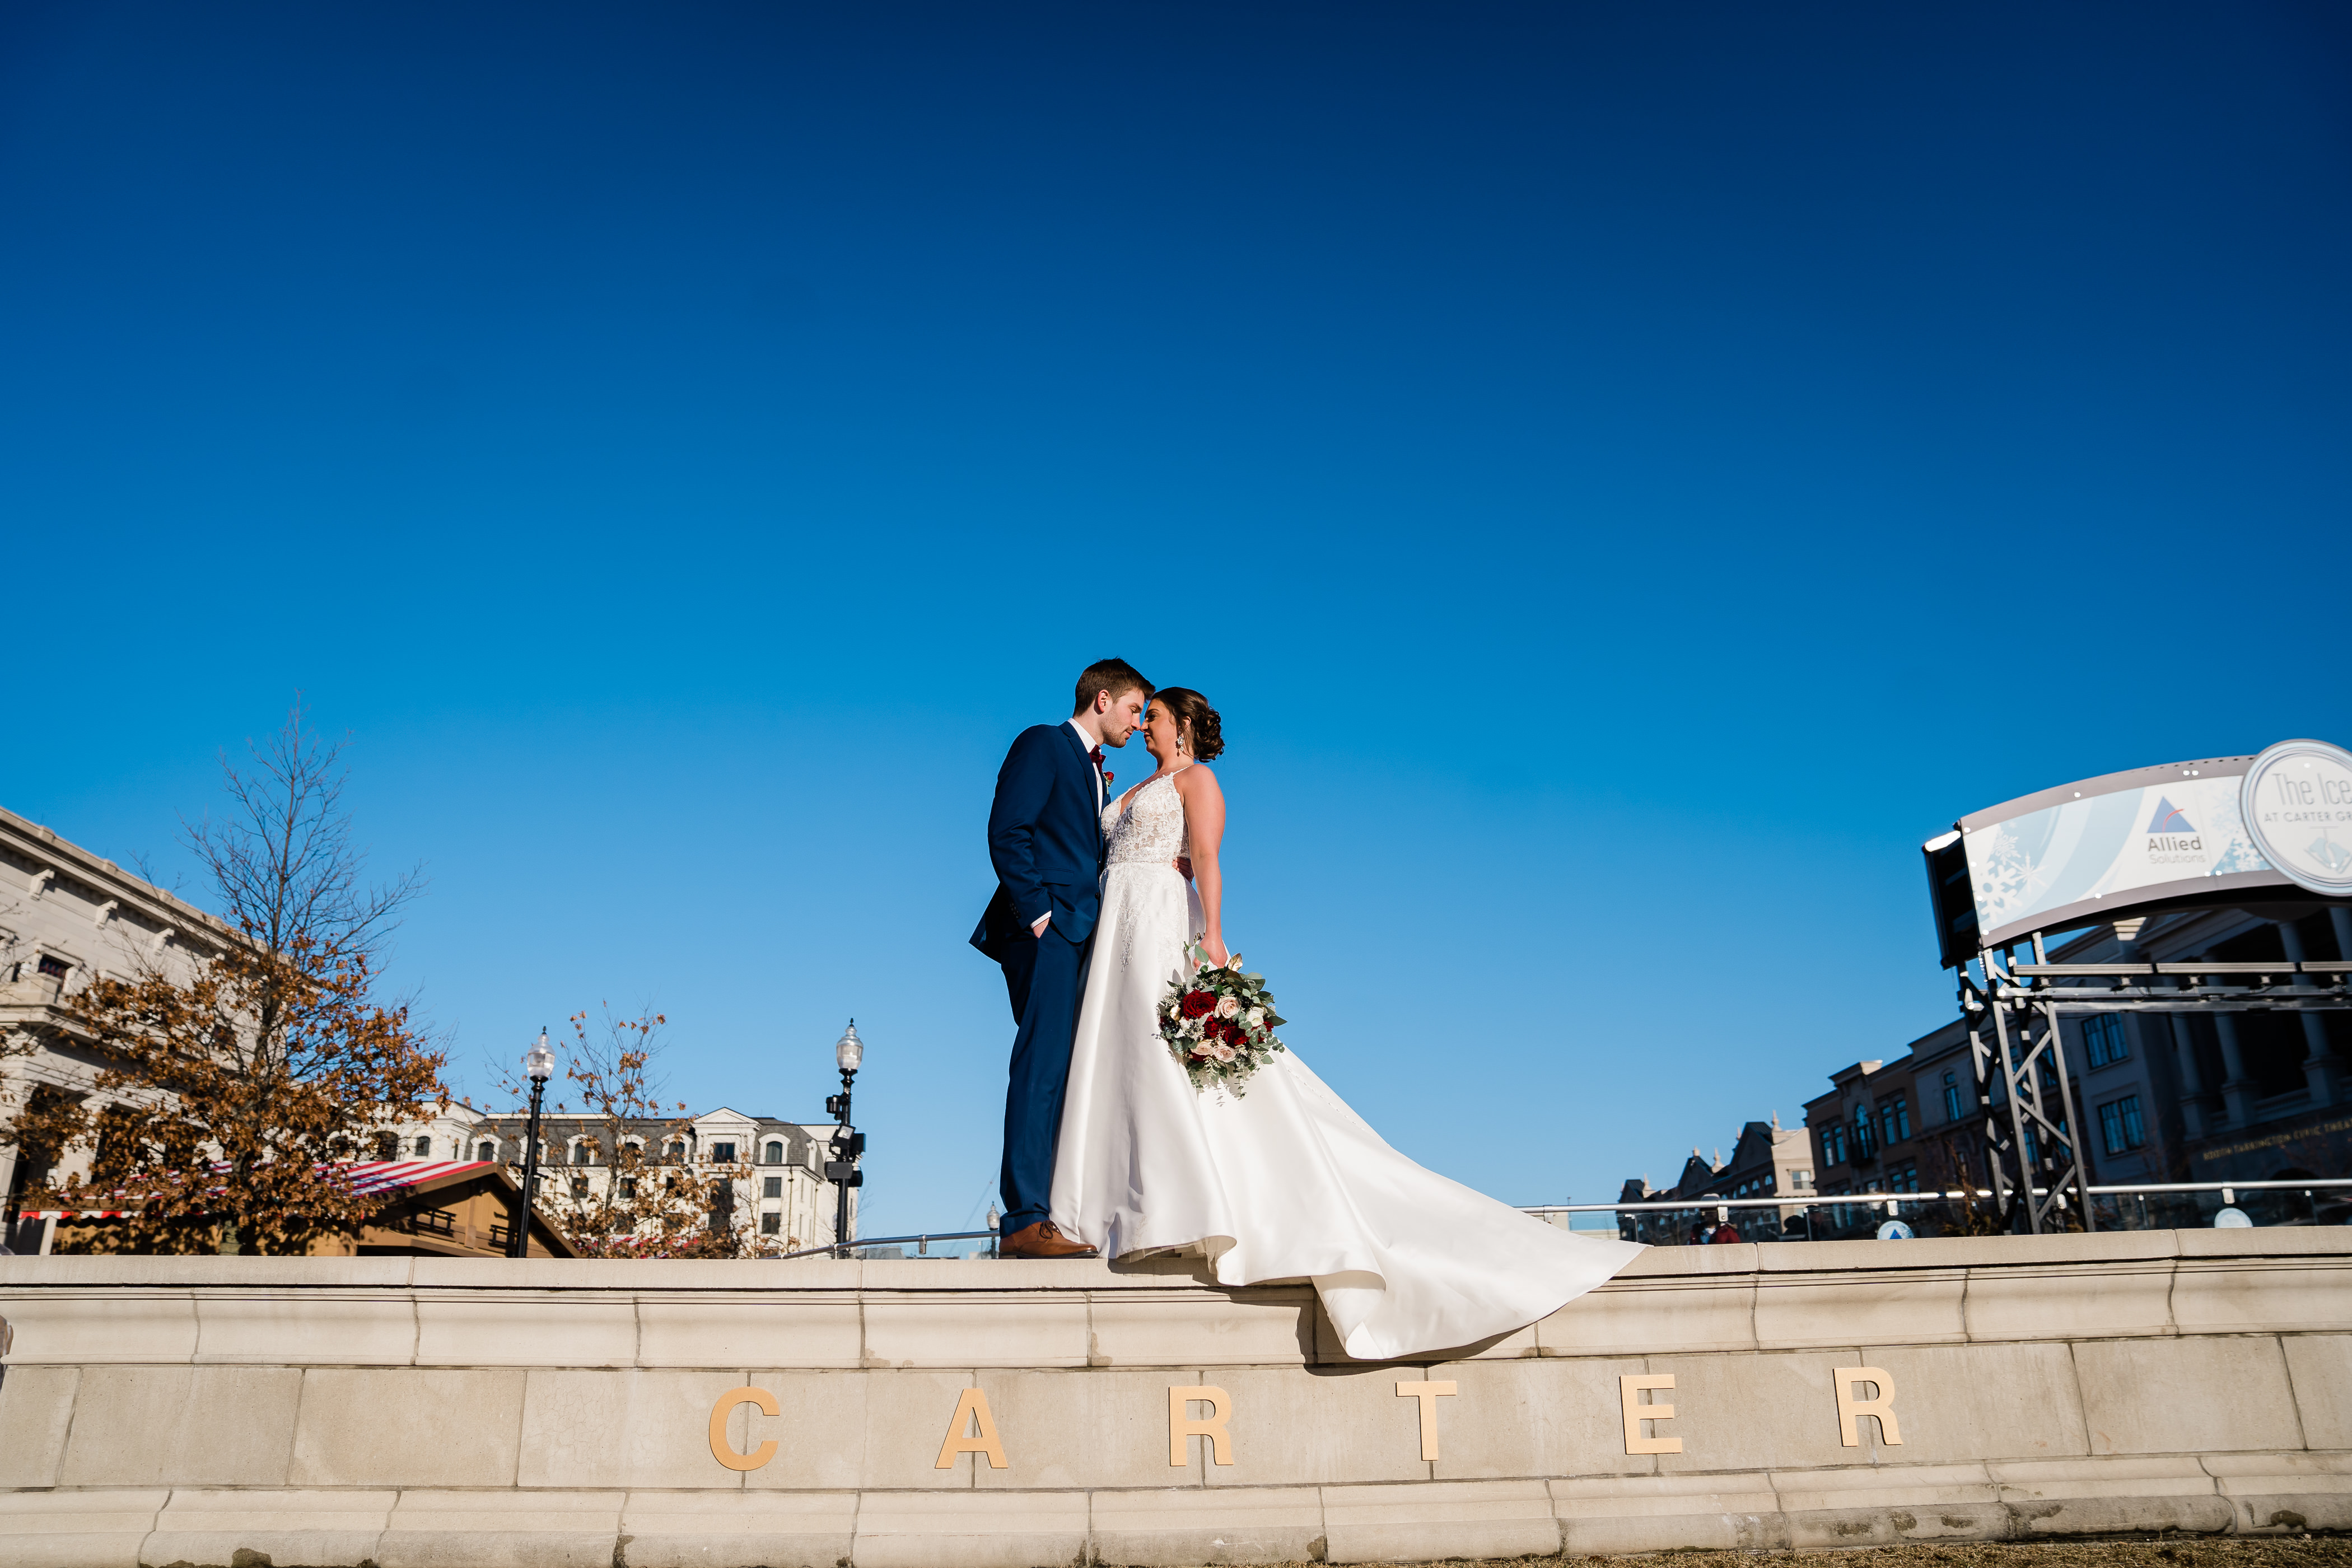 Fort Wayne outdoor bridals with bride and groom embracing on the top of stairs in a park with clear blue skies behind them